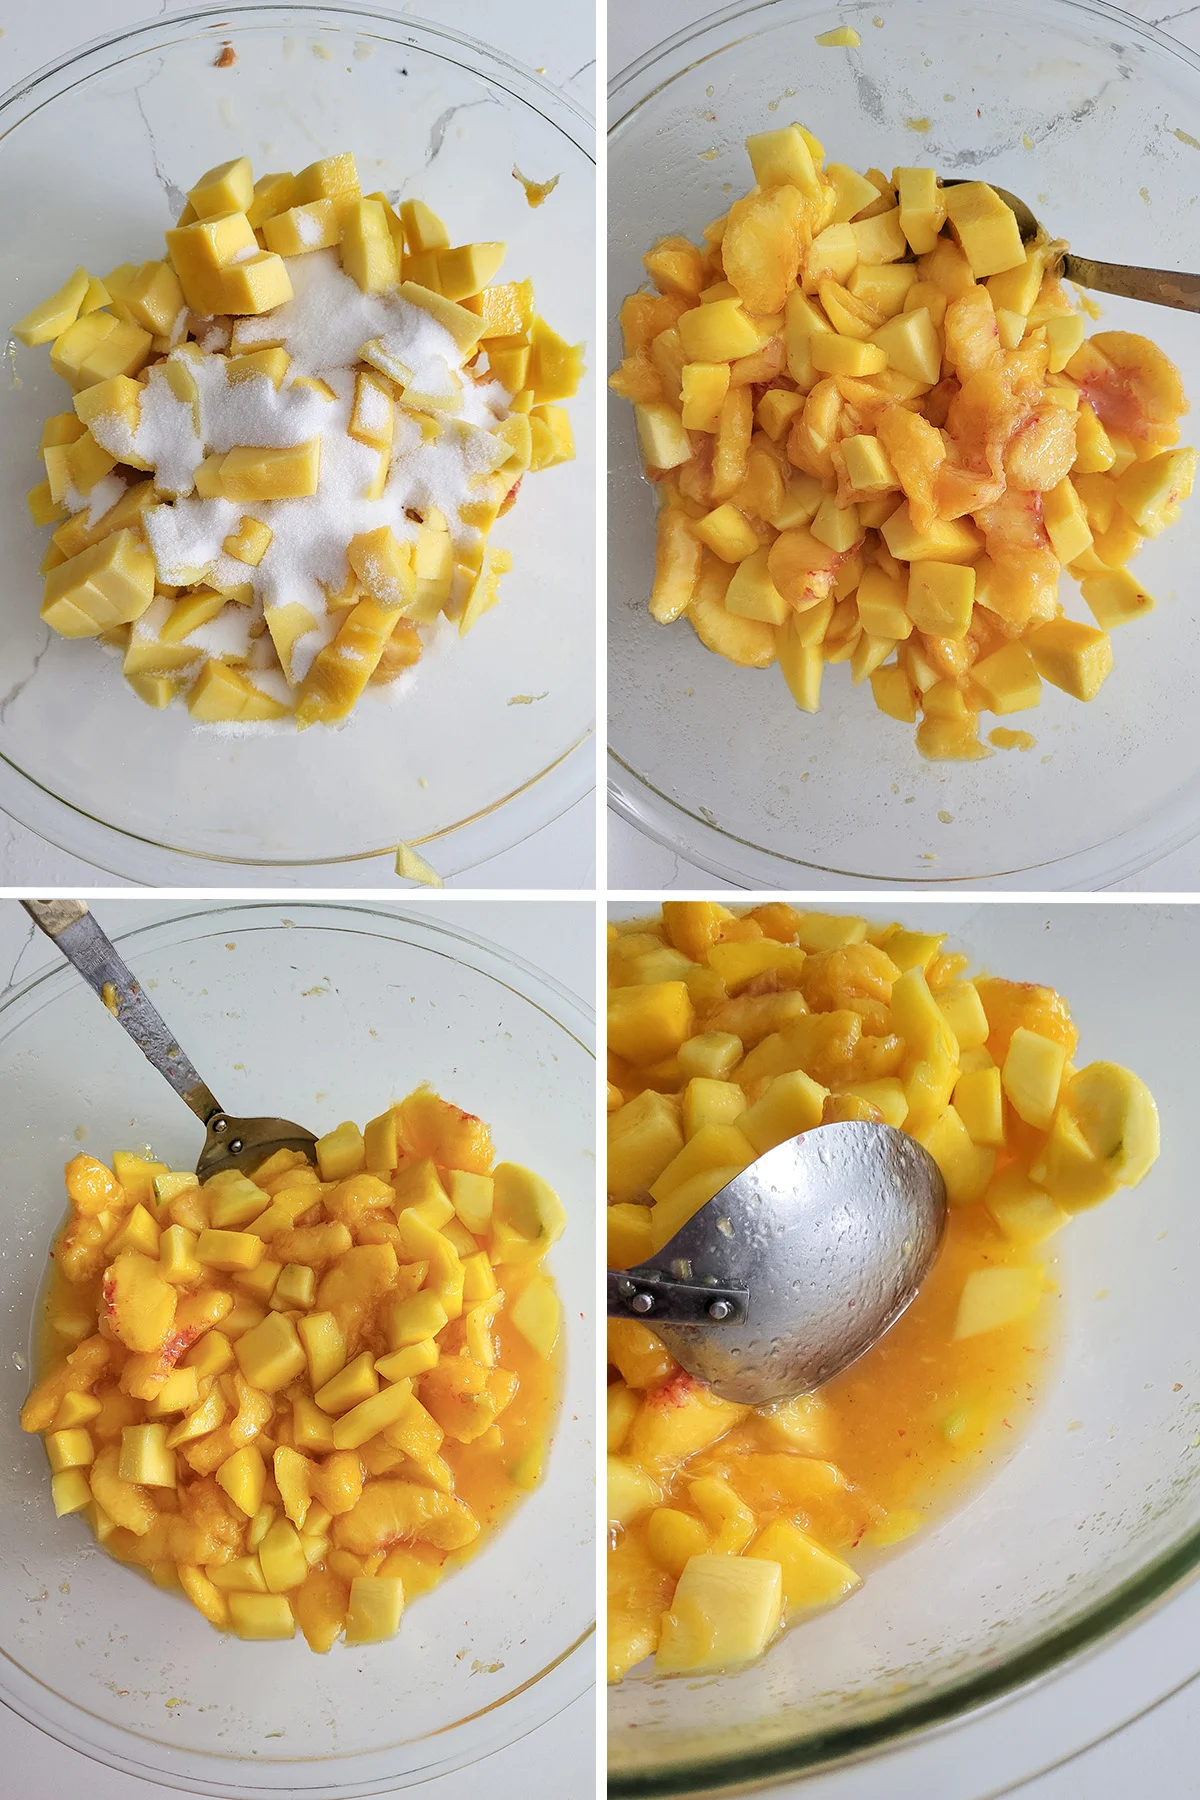 Chopped peaches and mango mixed with sugar in a glass bowl.